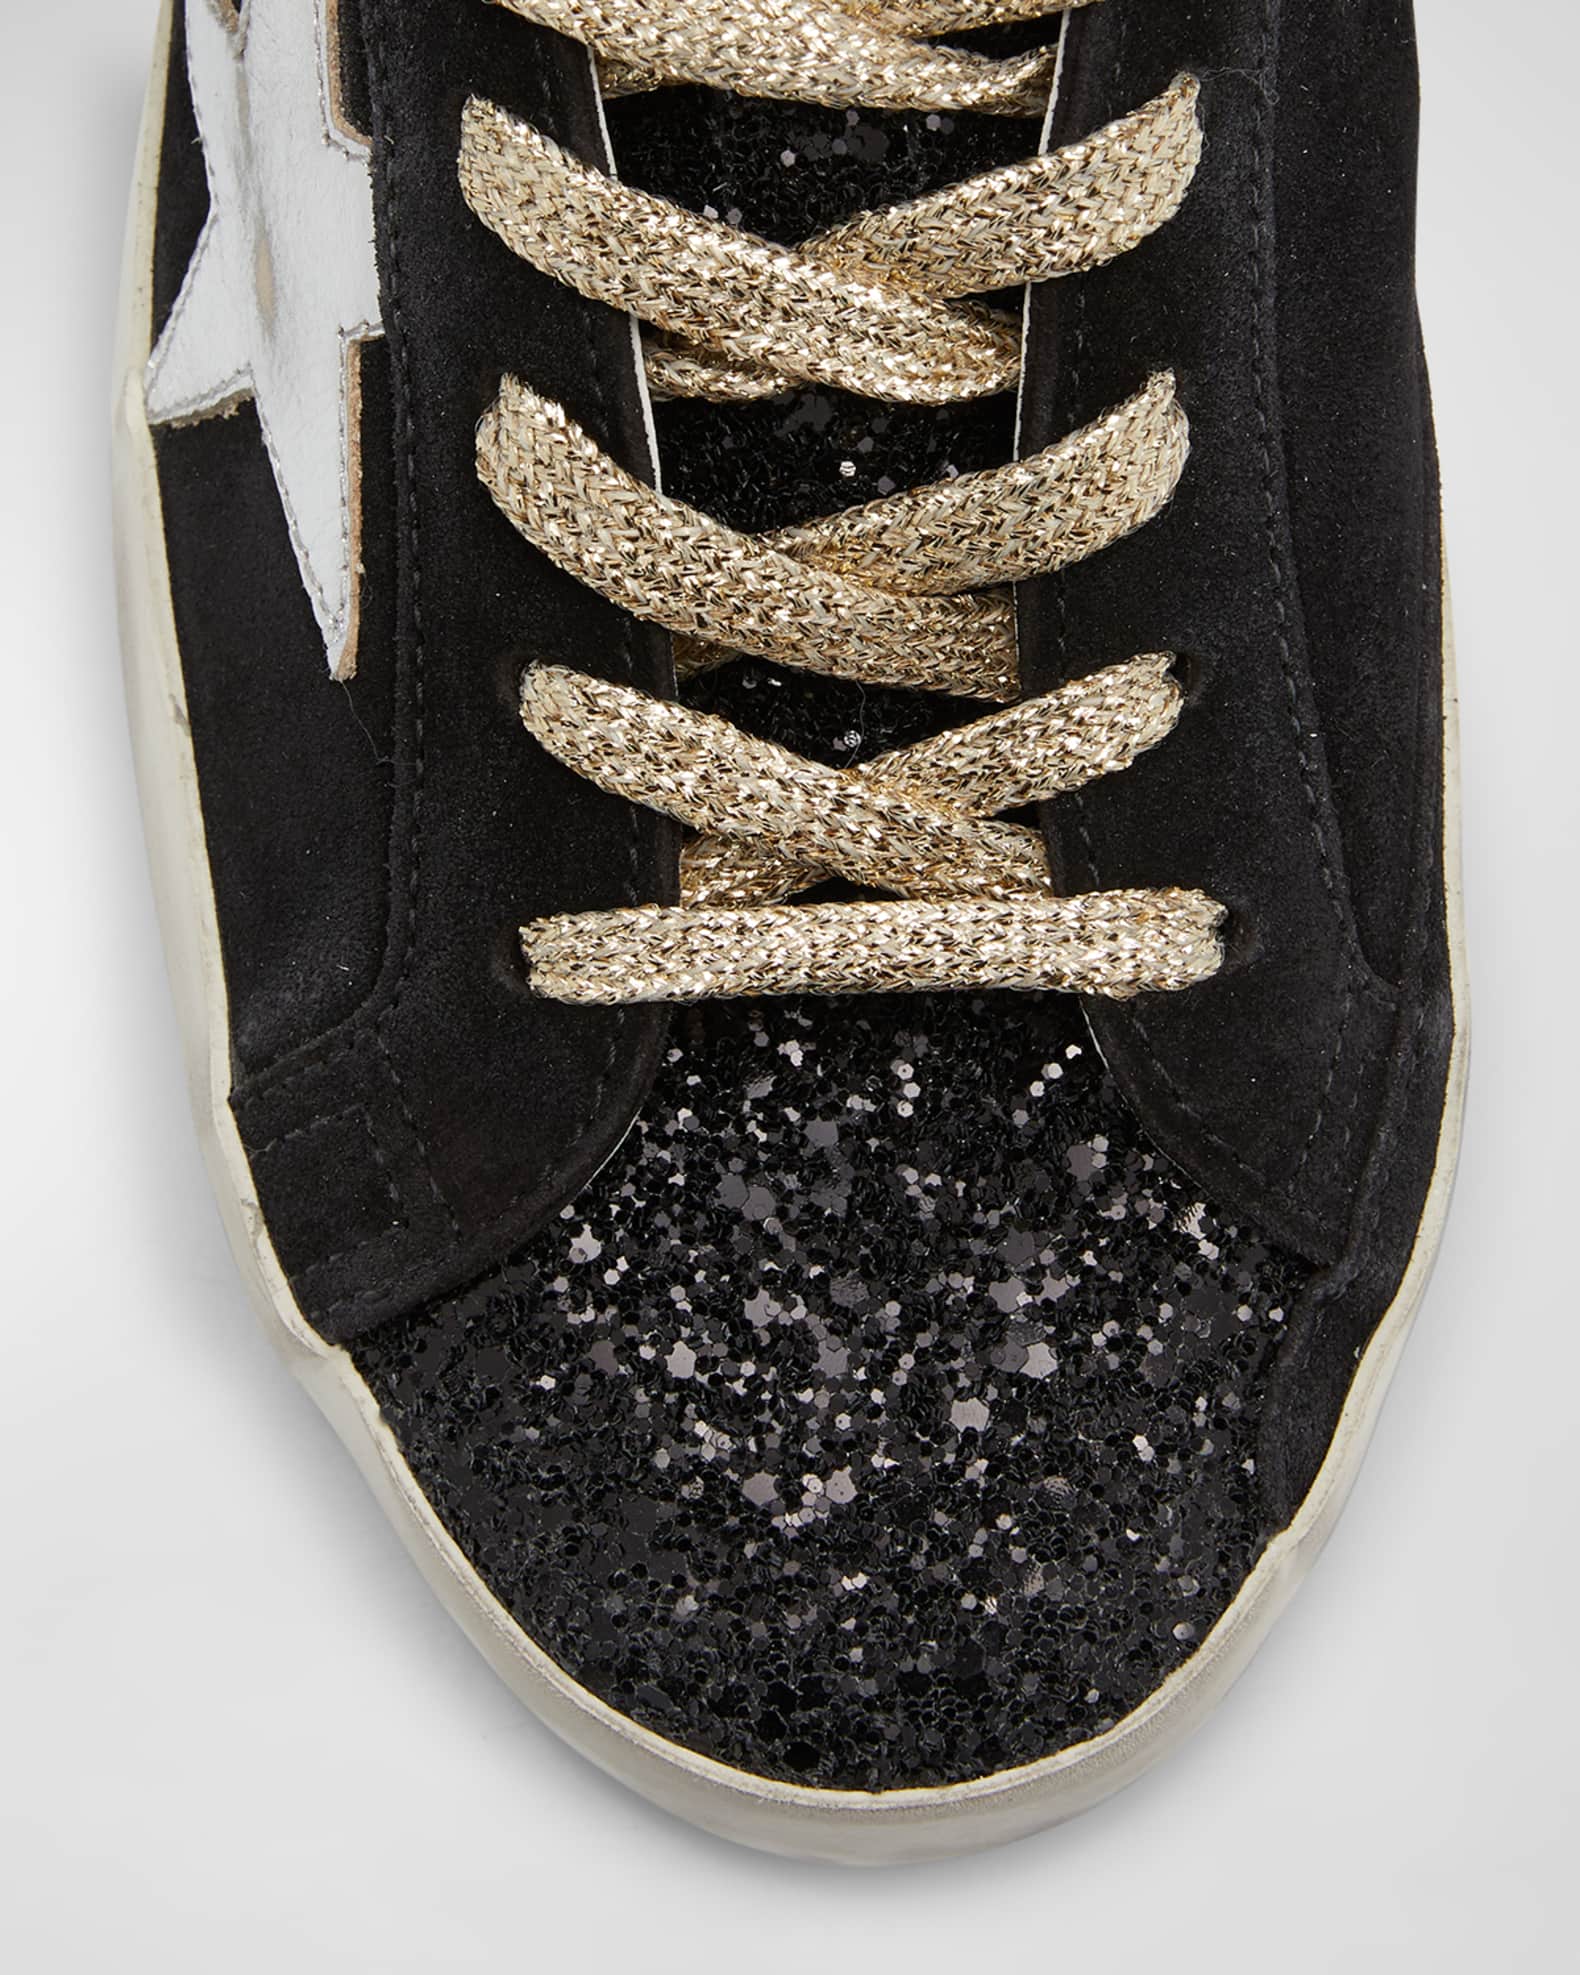 Golden Goose Super Star Glitter Faux-Leather Low-Top Sneakers | Neiman ...